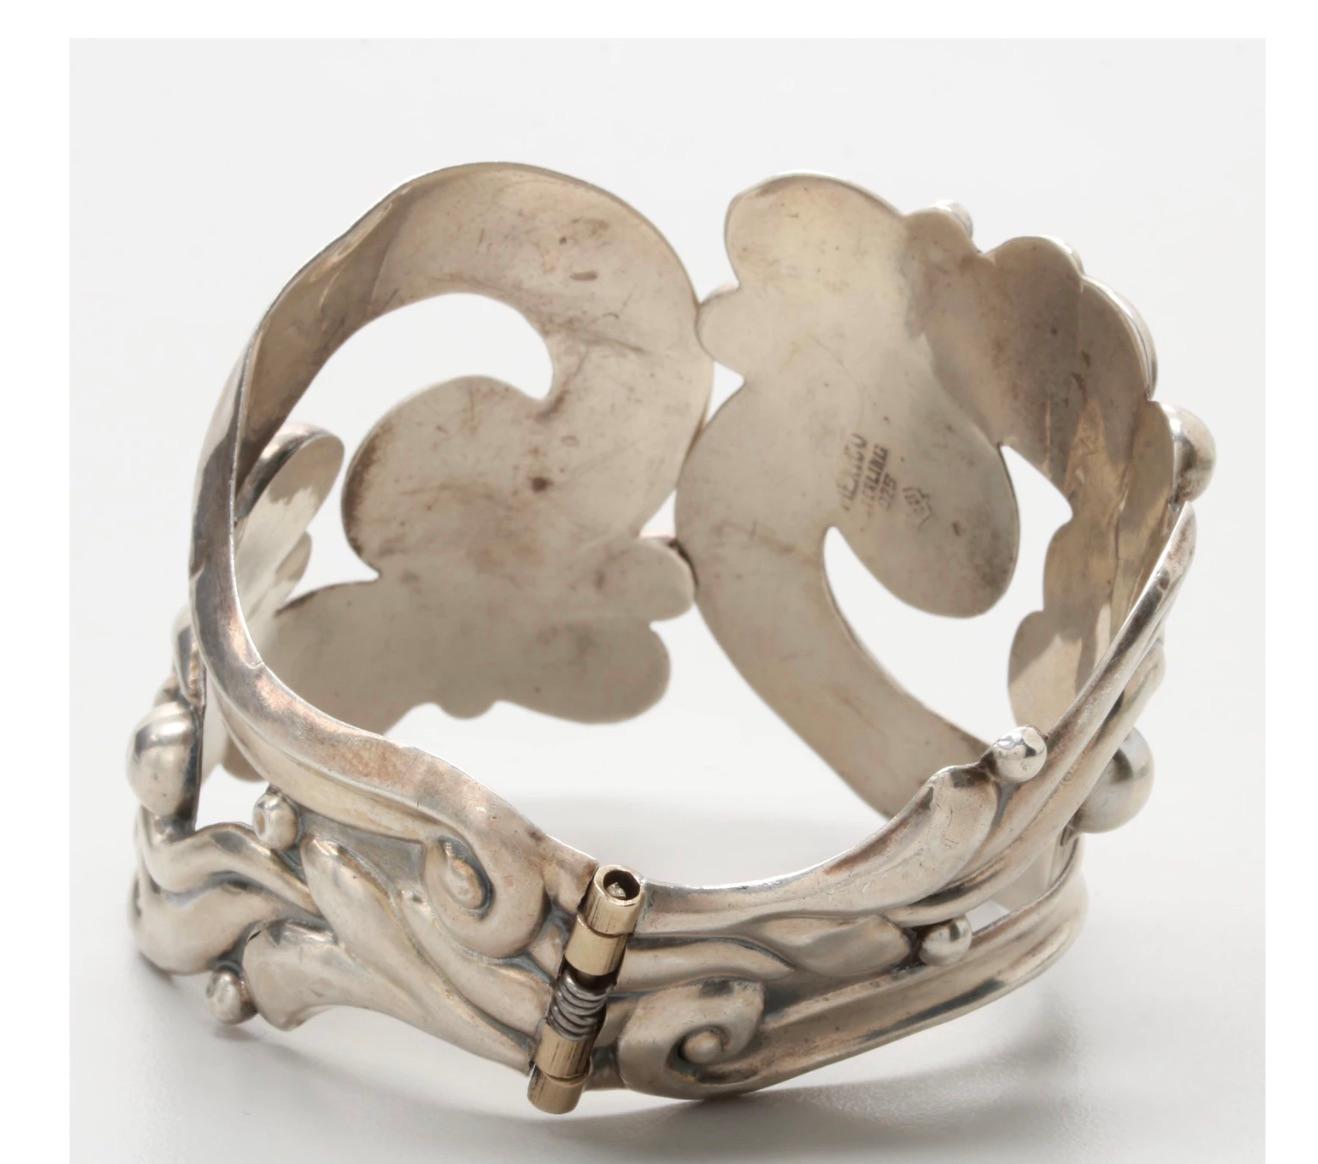 Artisan Superb Rare Mexico Sterling Silver Clamper Bracelet c. 1940s by Antonio Pineda For Sale